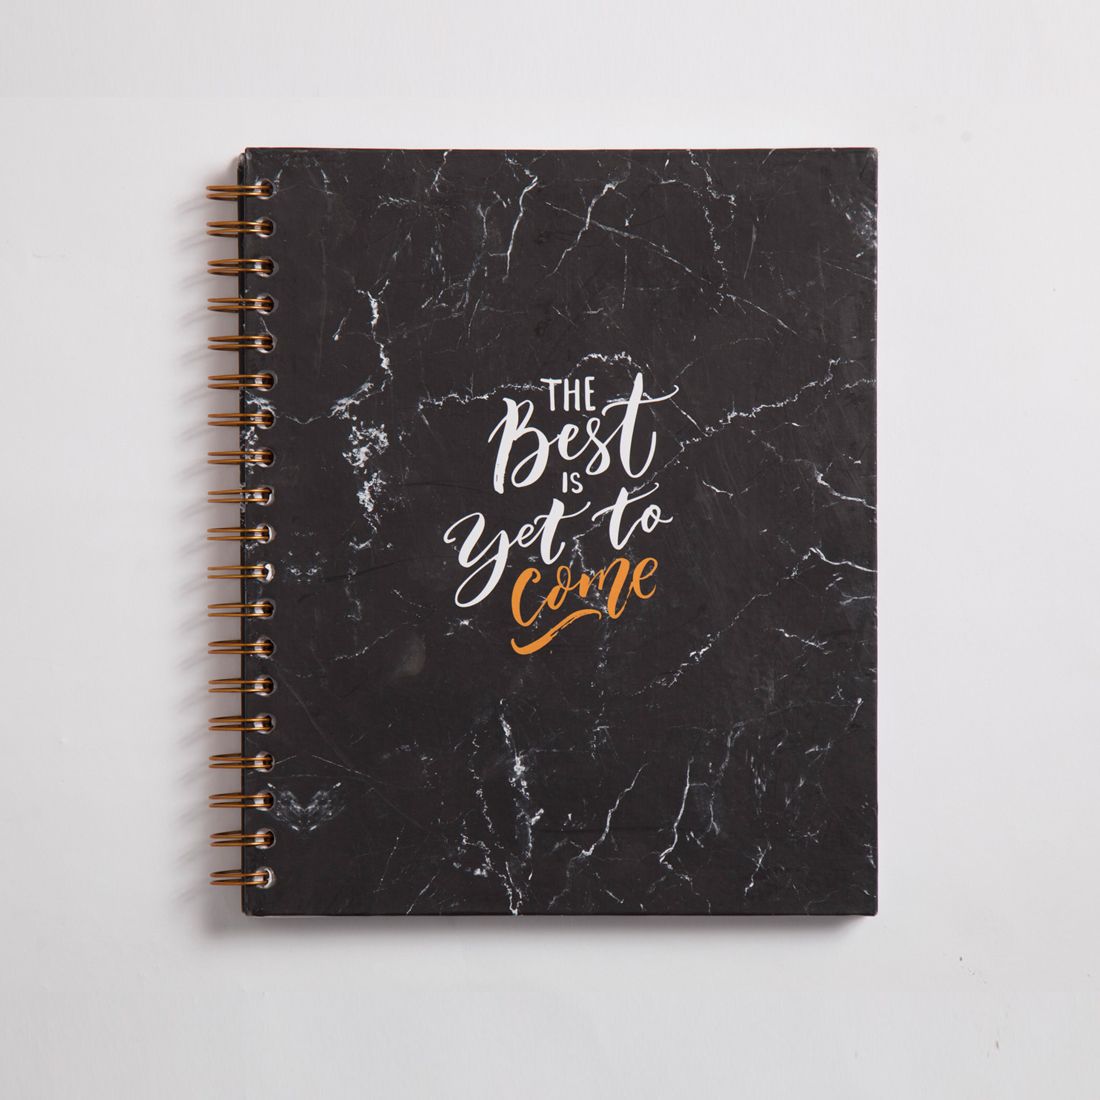 Marble Wire Notebook A4 Size -3 Subjects